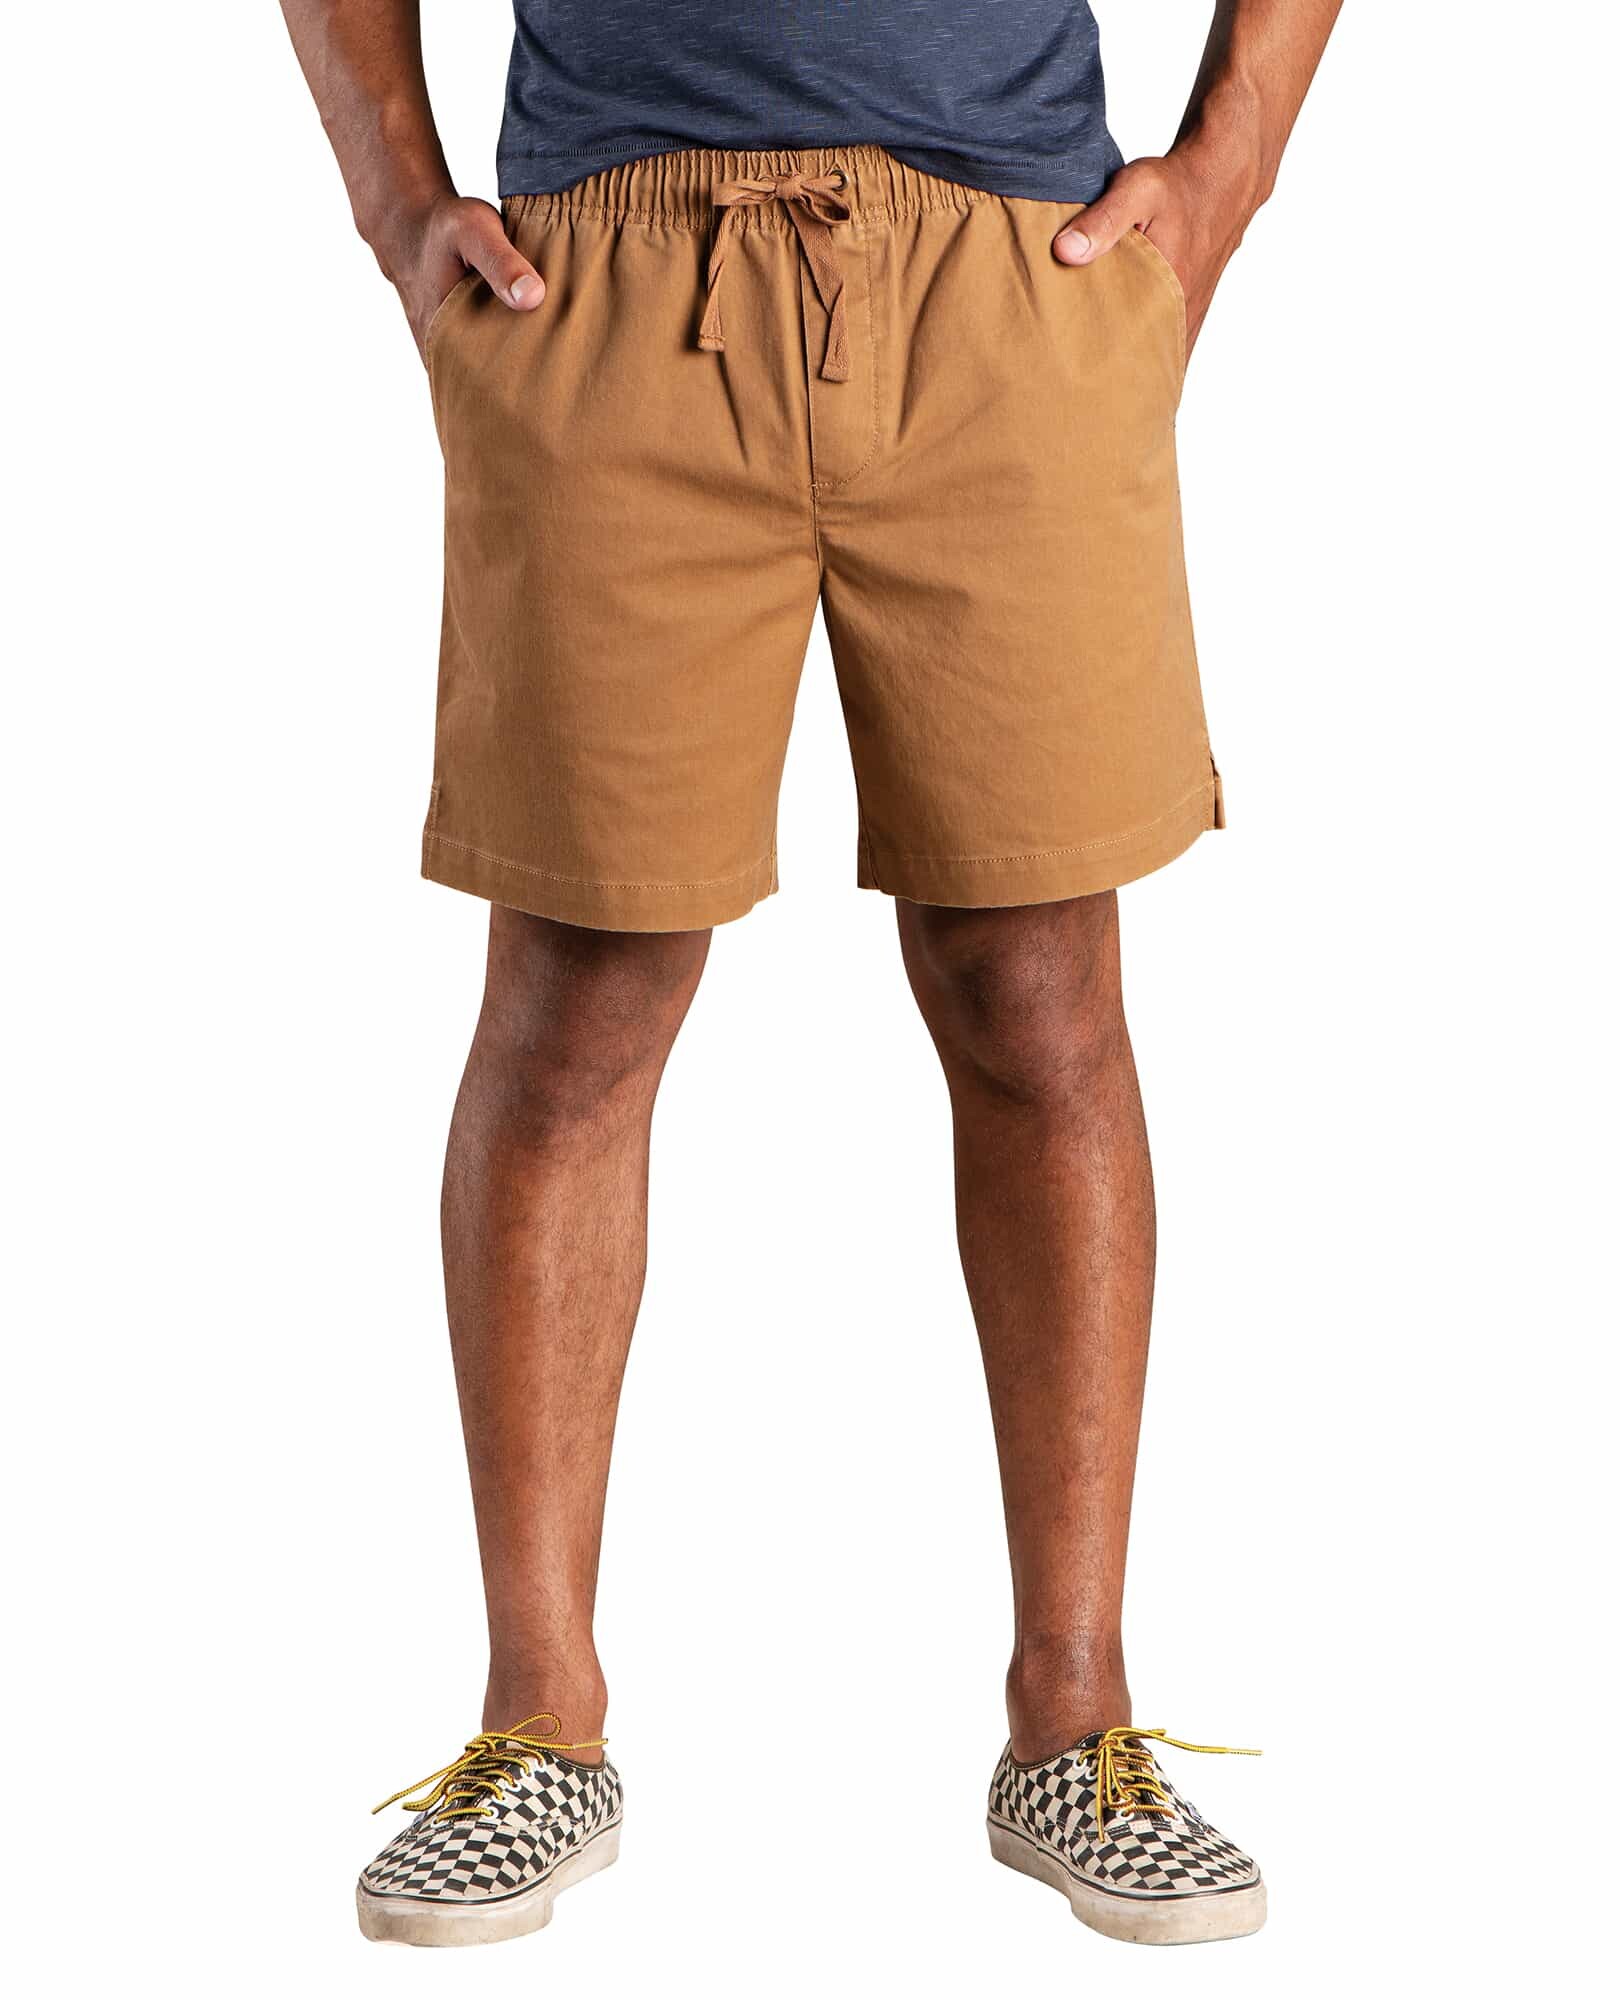 Toad & Co-Mission Ridge Pull-On Short - Men's